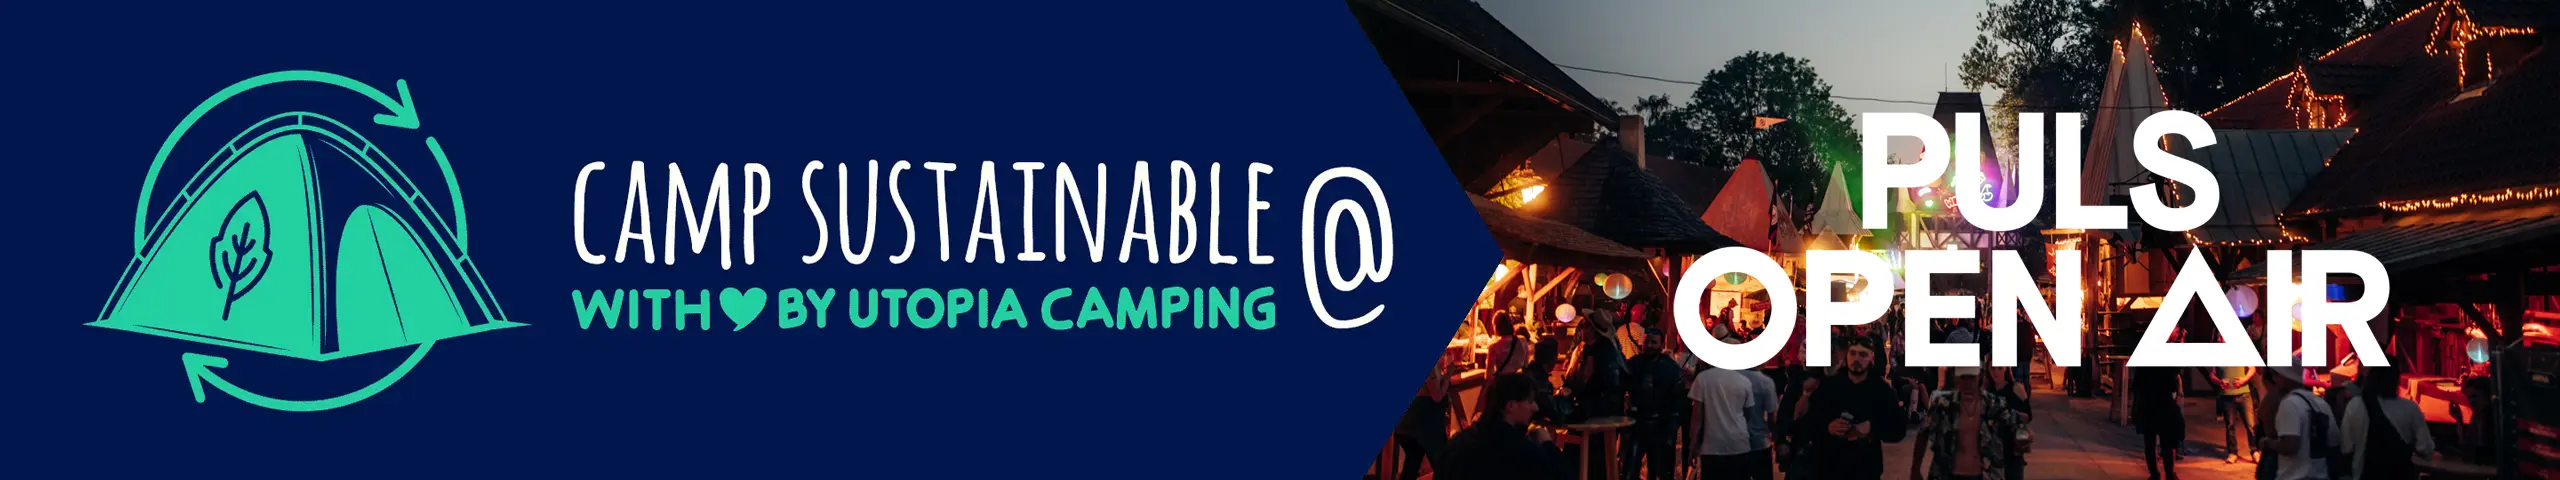 Camping tents and accessories for Puls Open Air festival